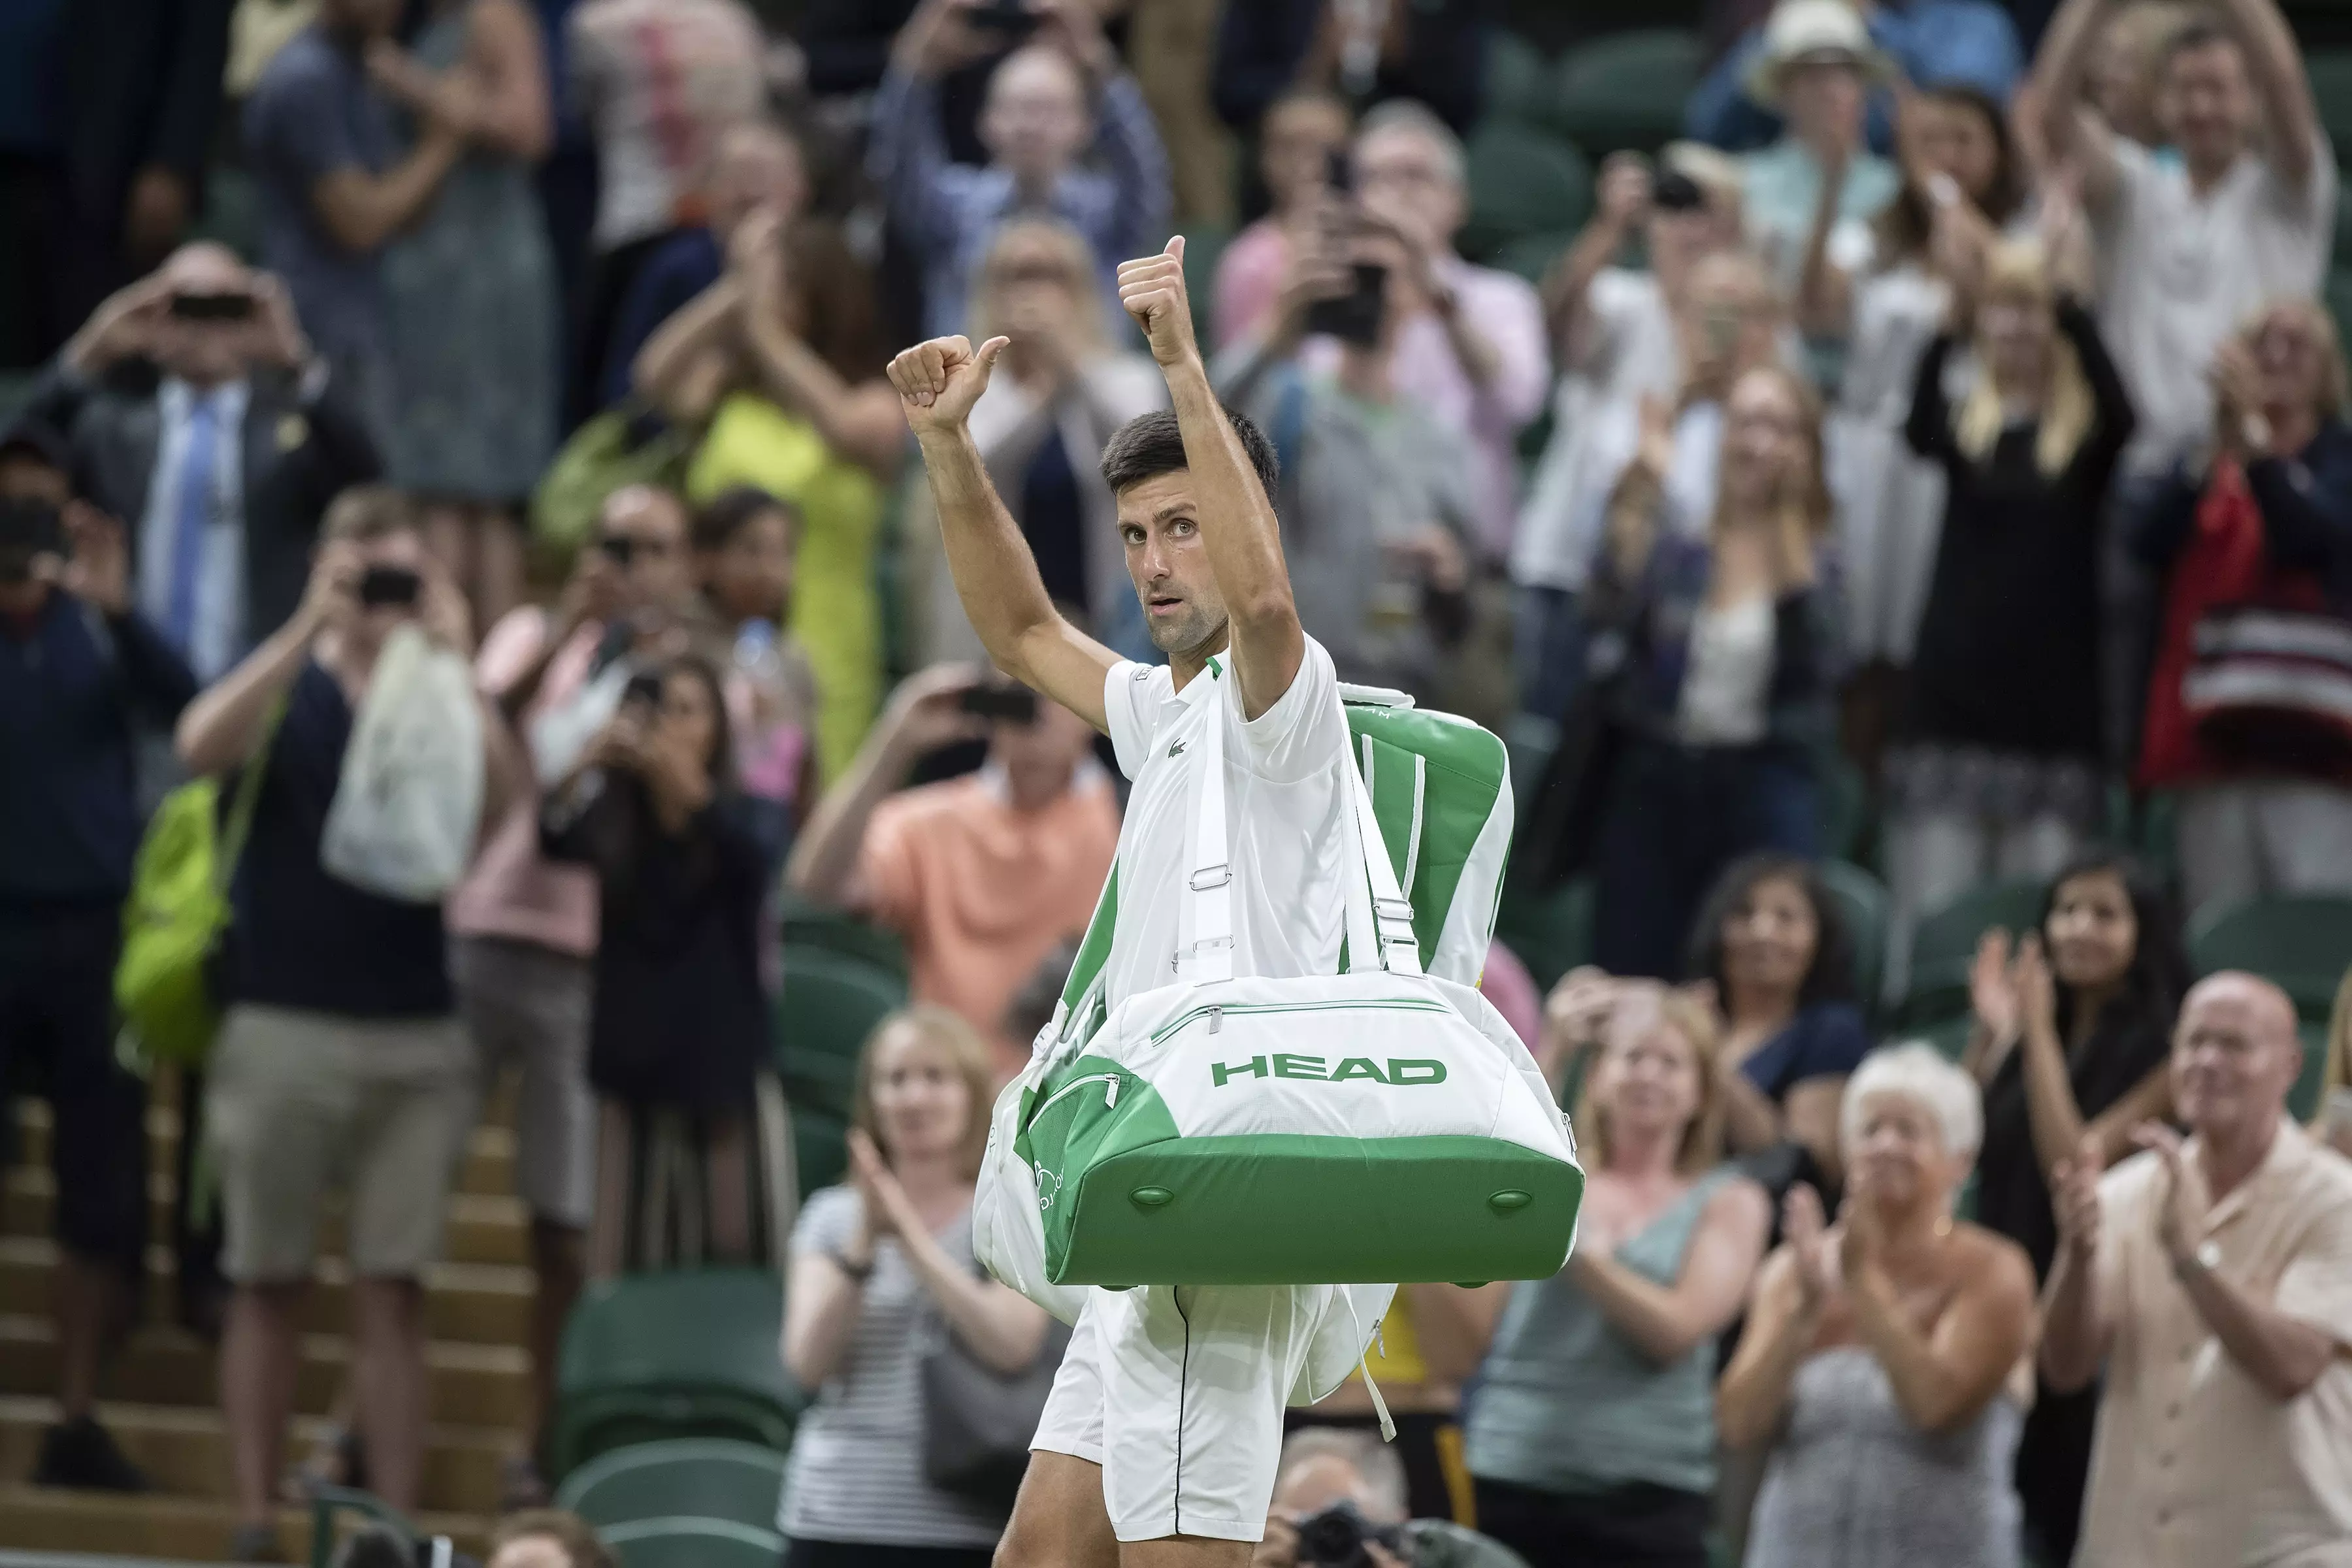 Djokovic walks off at the end of play on Friday with the match still in the balance. Image: PA Images